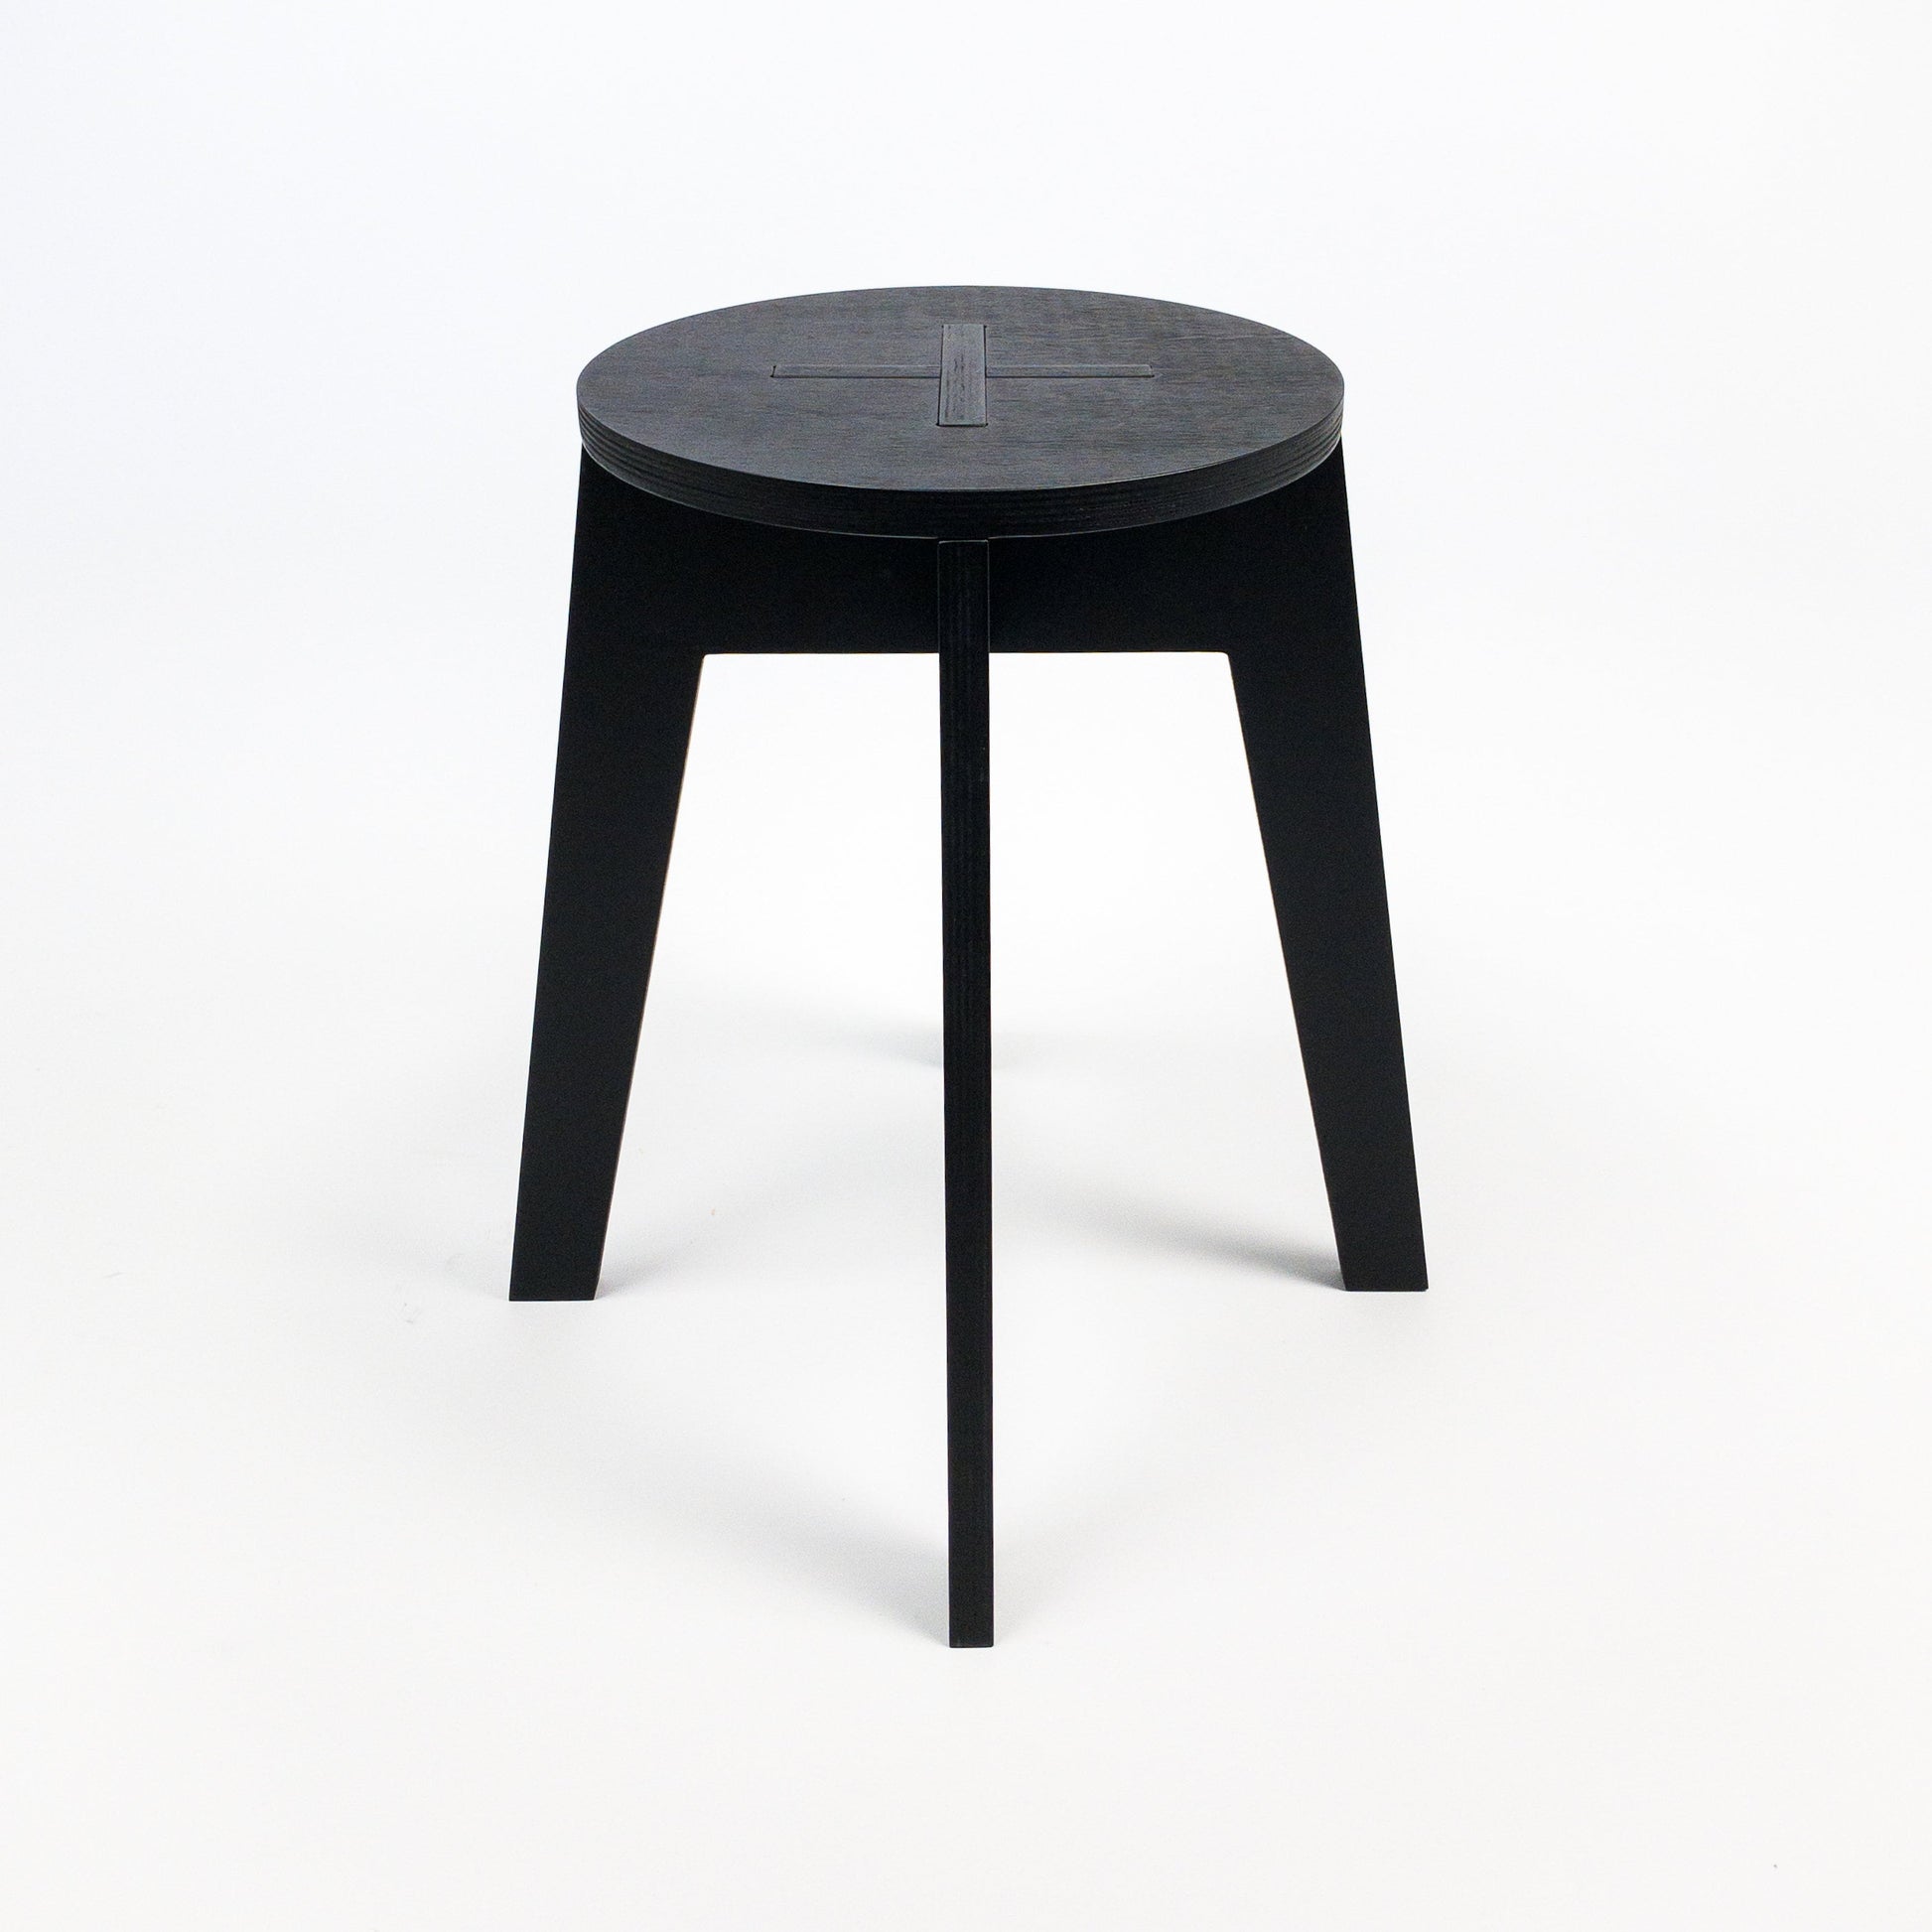 Modern plywood stool 45cm (17 3/4 ") high, great for craft fairs, studio, workshop, office